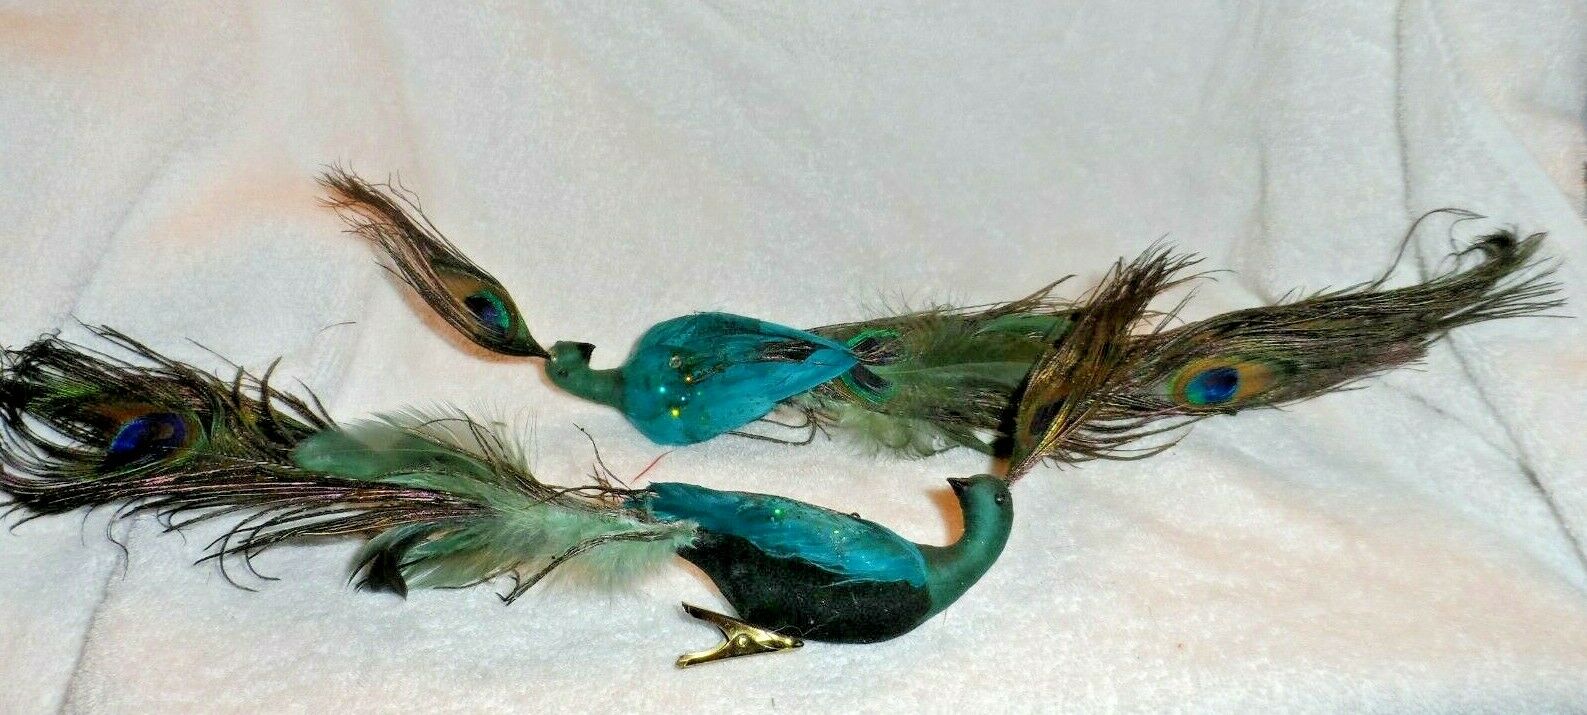 Lot Of 2 Teal Peacocks With Long Faux Feather Tail